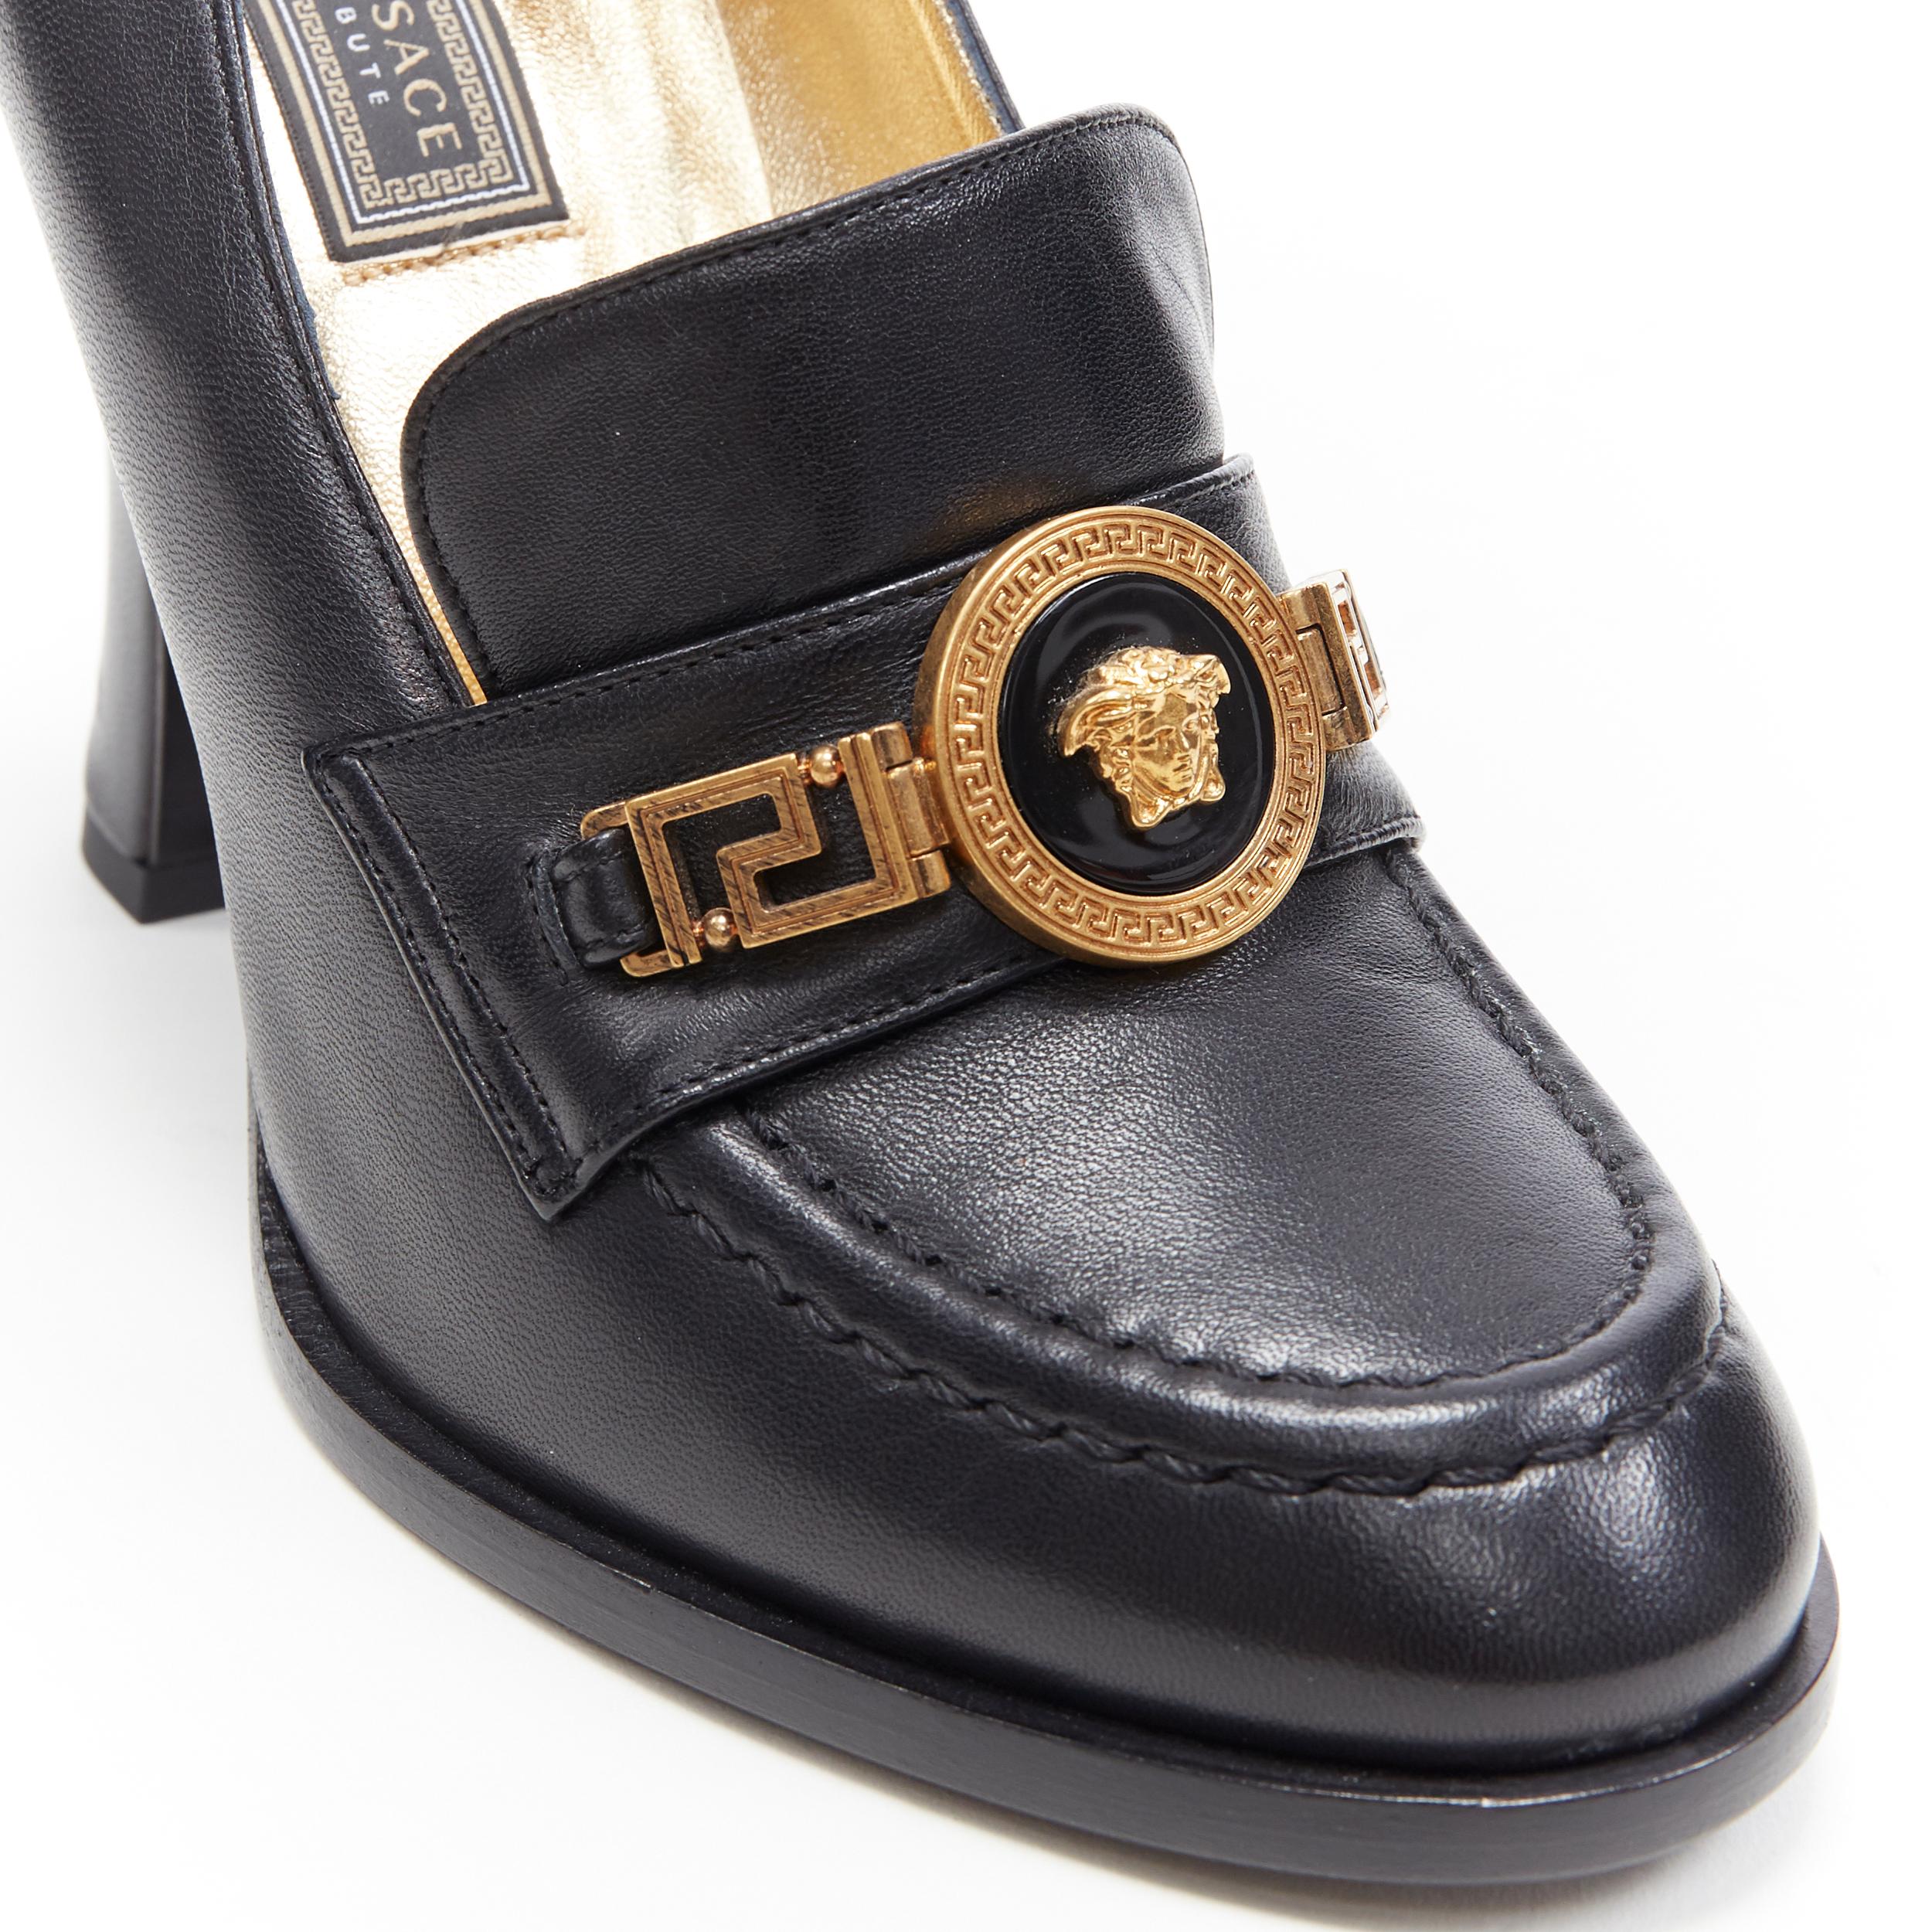 new VERSACE SS18 black leather Medusa chain charm chunky high heel loafer EU37
Brand: Versace
Designer: Donatella Versace
Collection: Spring Summer 2018
Model Name / Style: Heeled loafer
Material: Leather
Color: Black
Pattern: Solid
Lining material: